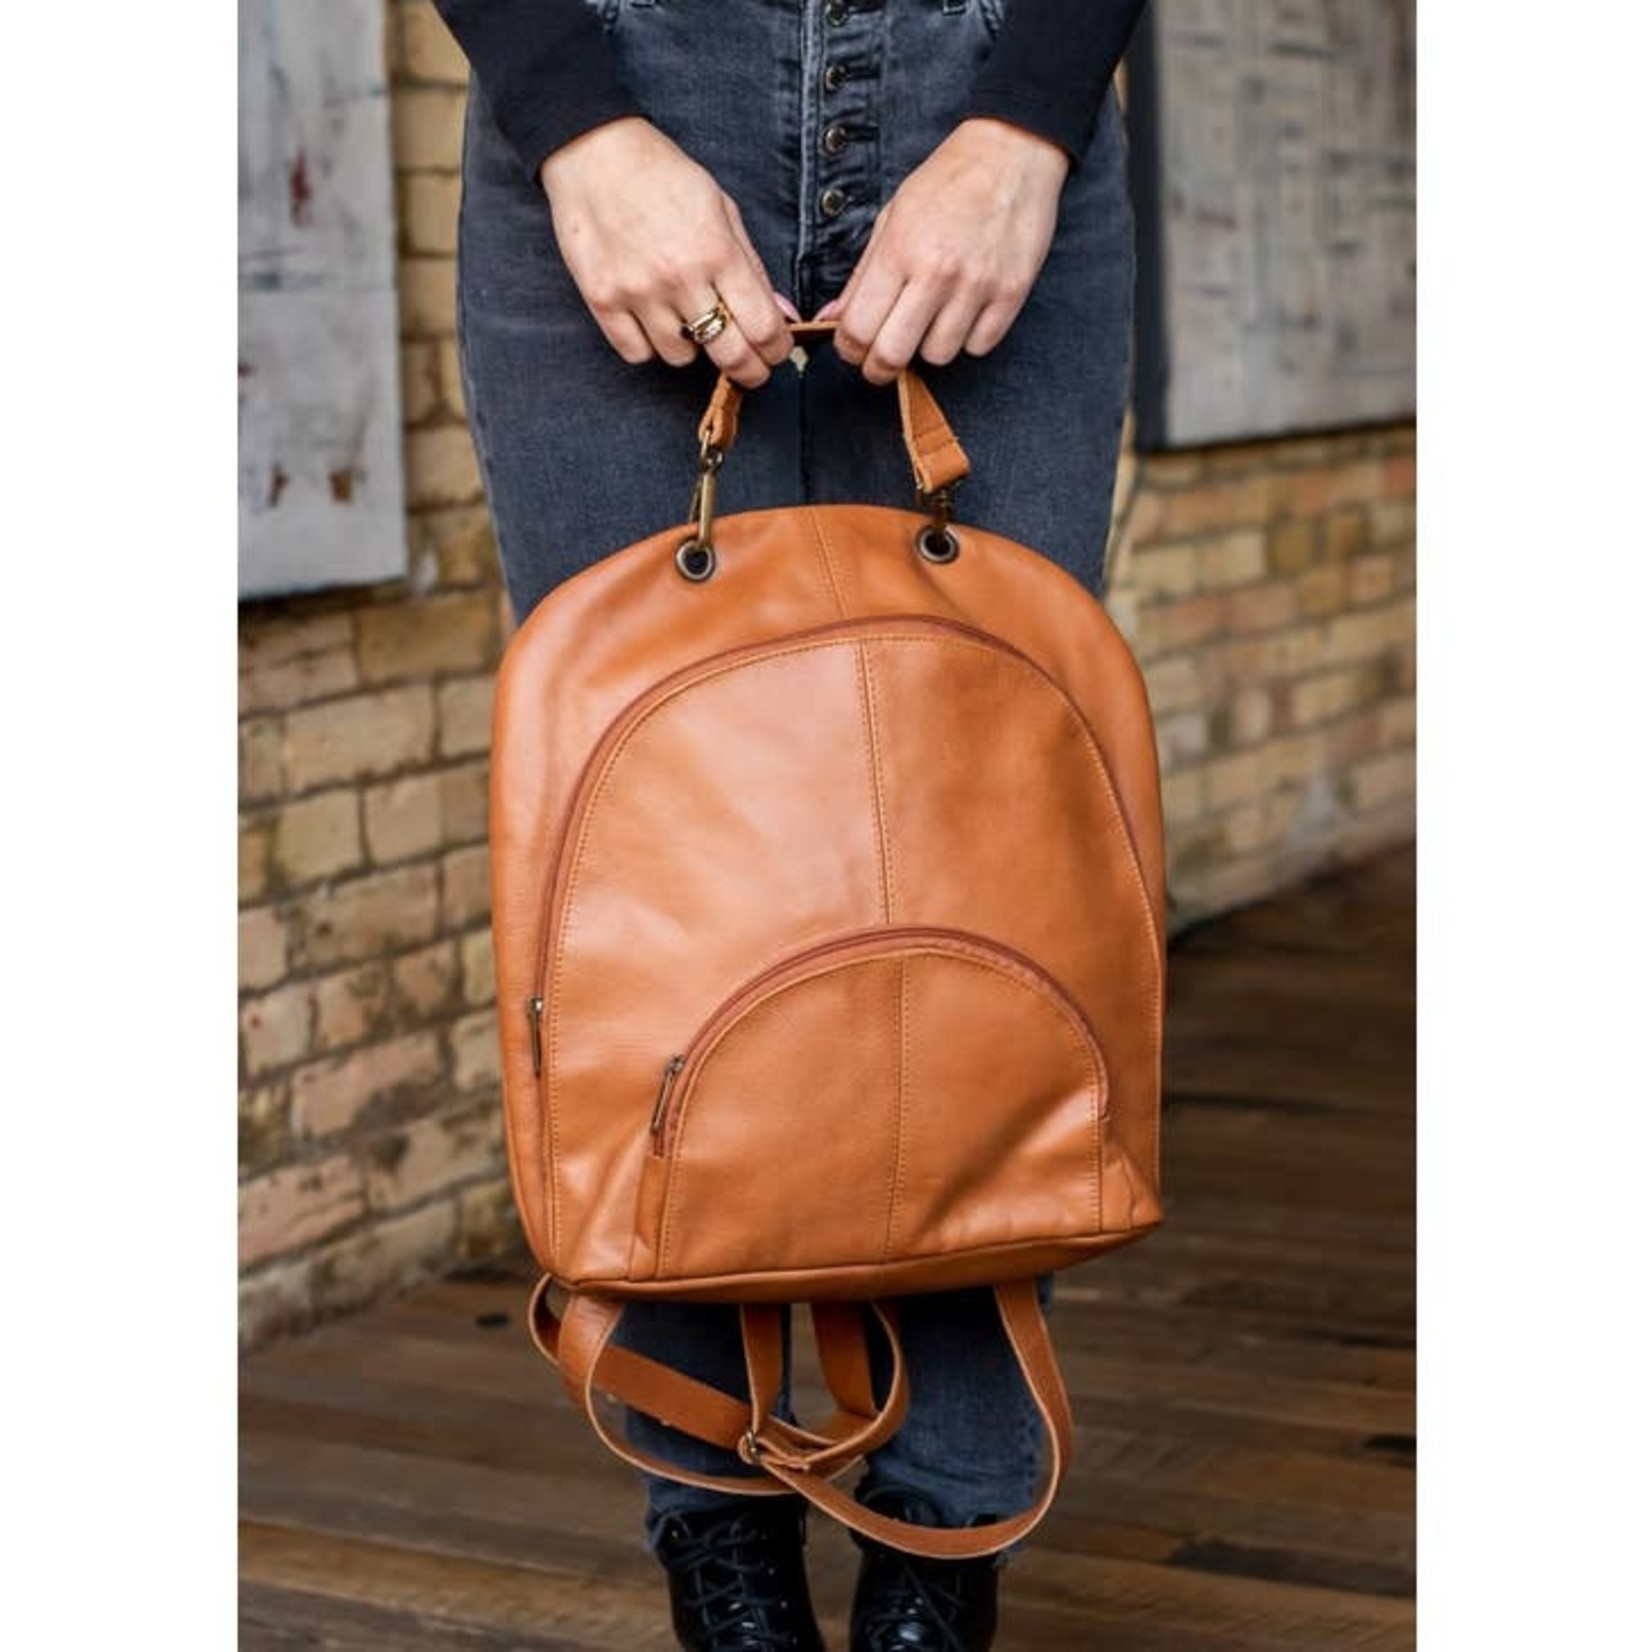 Leather Handbags and Accessories Brown Leather Backpack 187